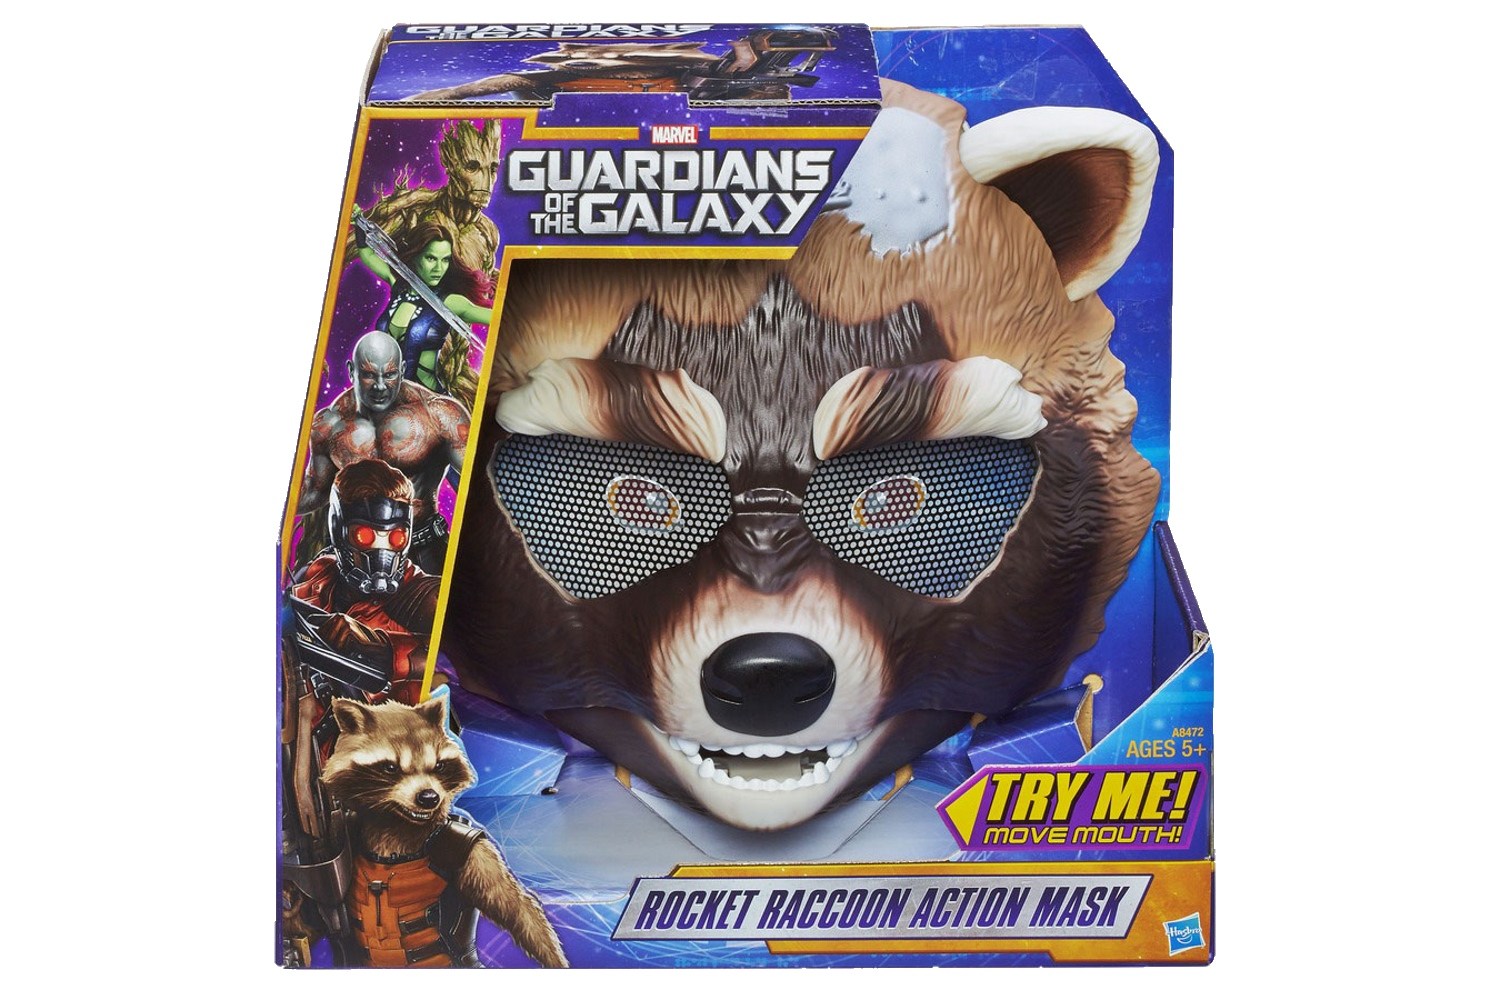 Marvel Guardians of the Galaxy Rocket Raccoon Action Mask - image 2 of 5